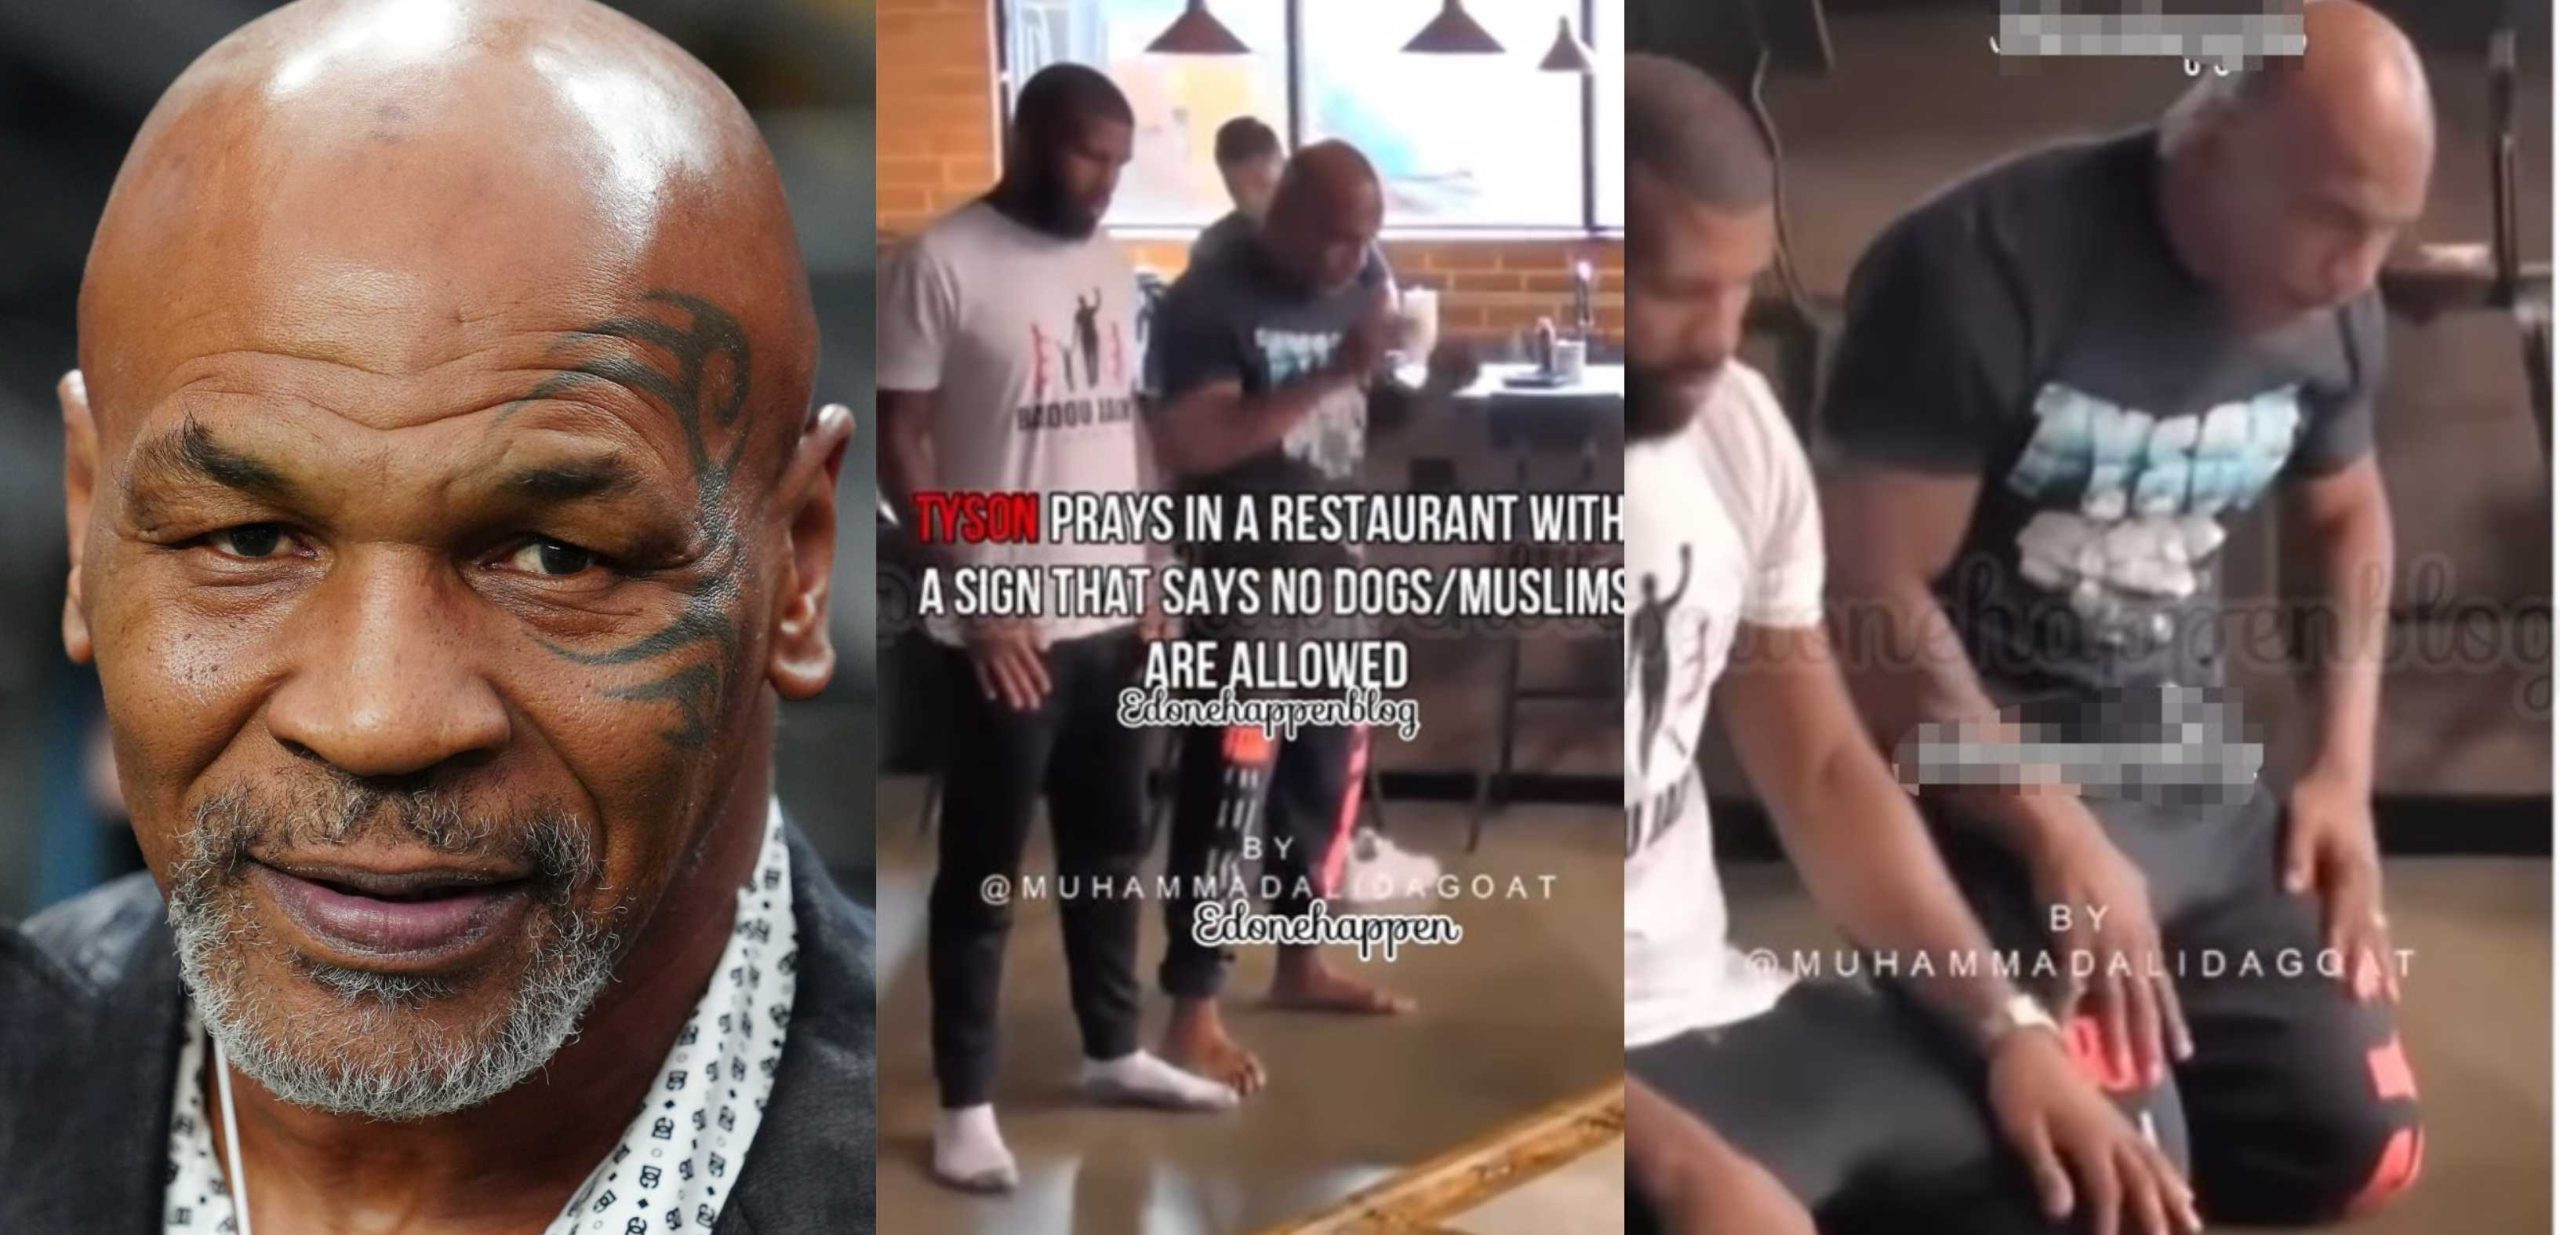 Moment Mike Tyson & 2 other boxers observe prayer in front of restaurant that says “No dogs or Muslims allowed”